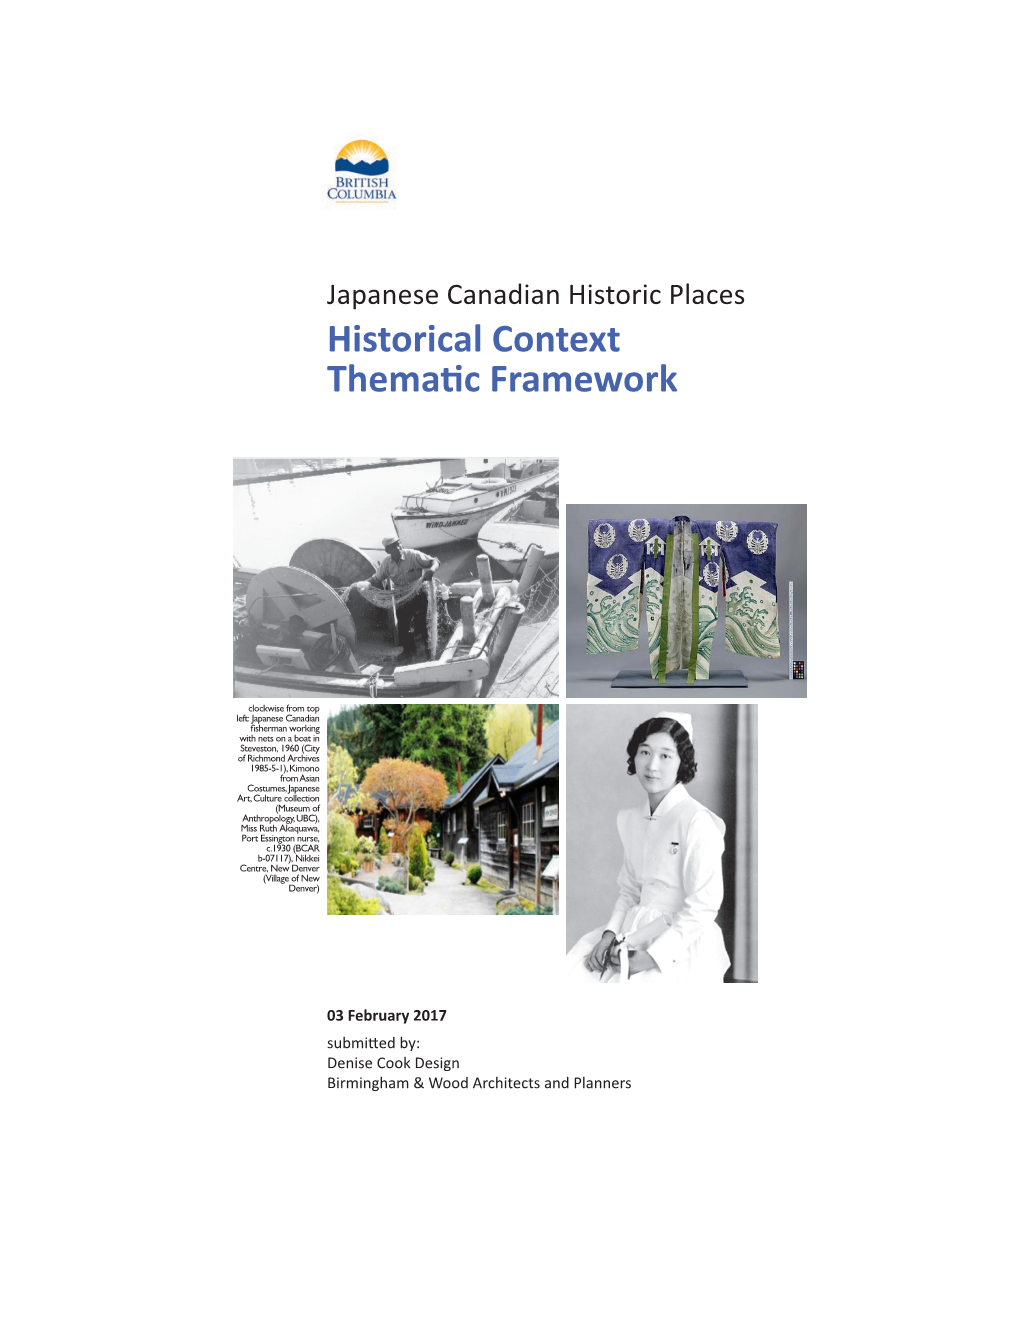 Historical Context Thematic Framework